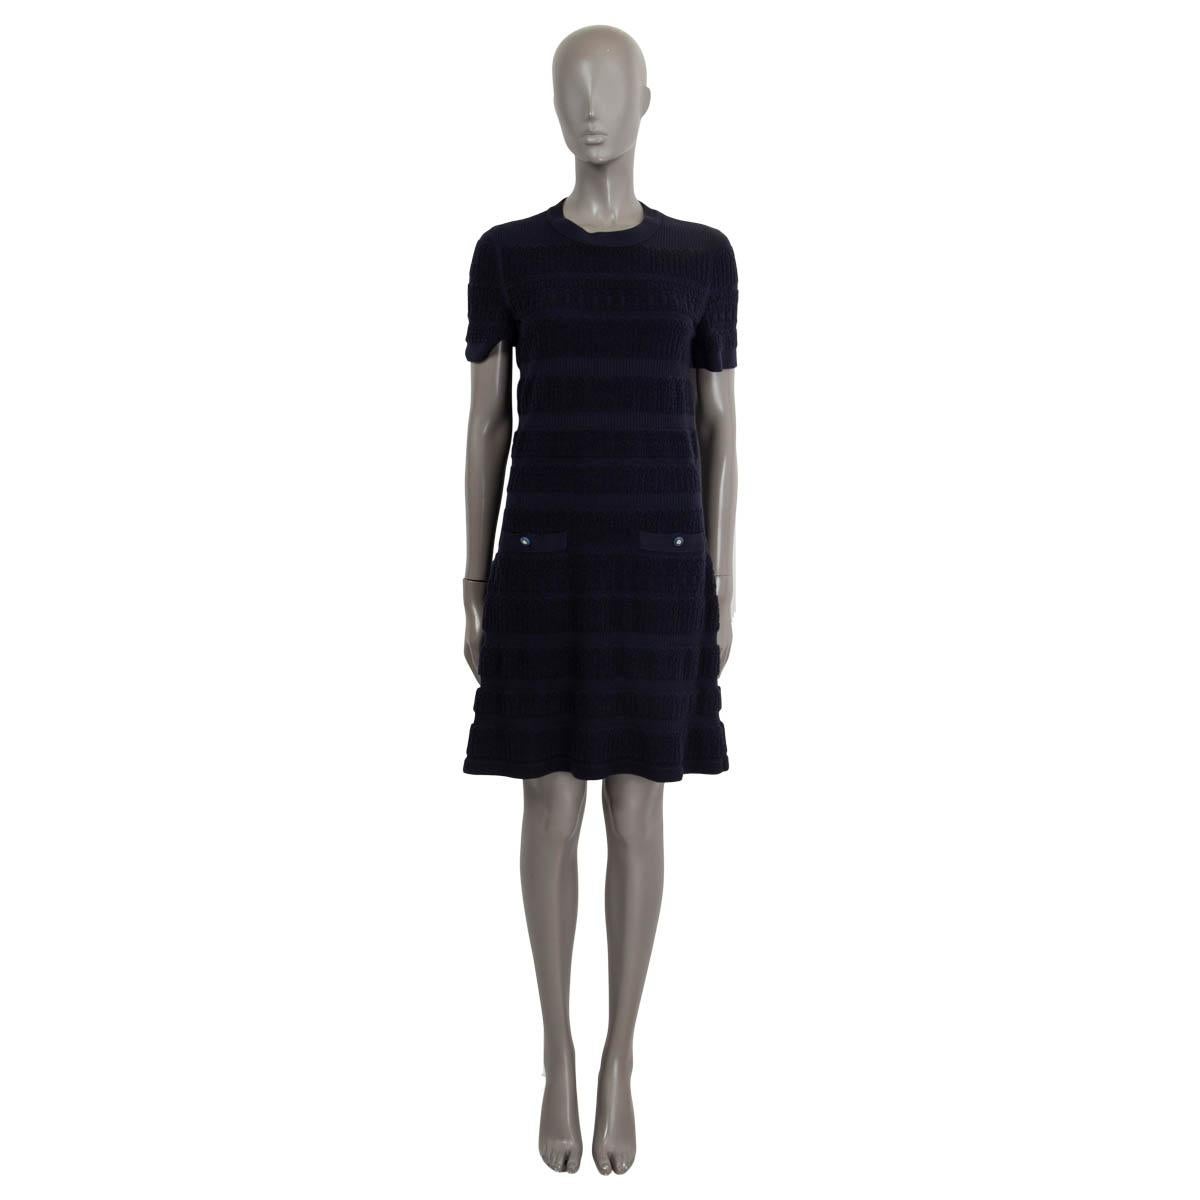 100% authentic Chanel textured rib-knit dress in navy blue wool (with 4% polyamide). Features short sleeves, two sewn shut buttoned slit pockets on the front and a crewneck. Opens with CC buttons in the back. Unlined. Has been worn and is in